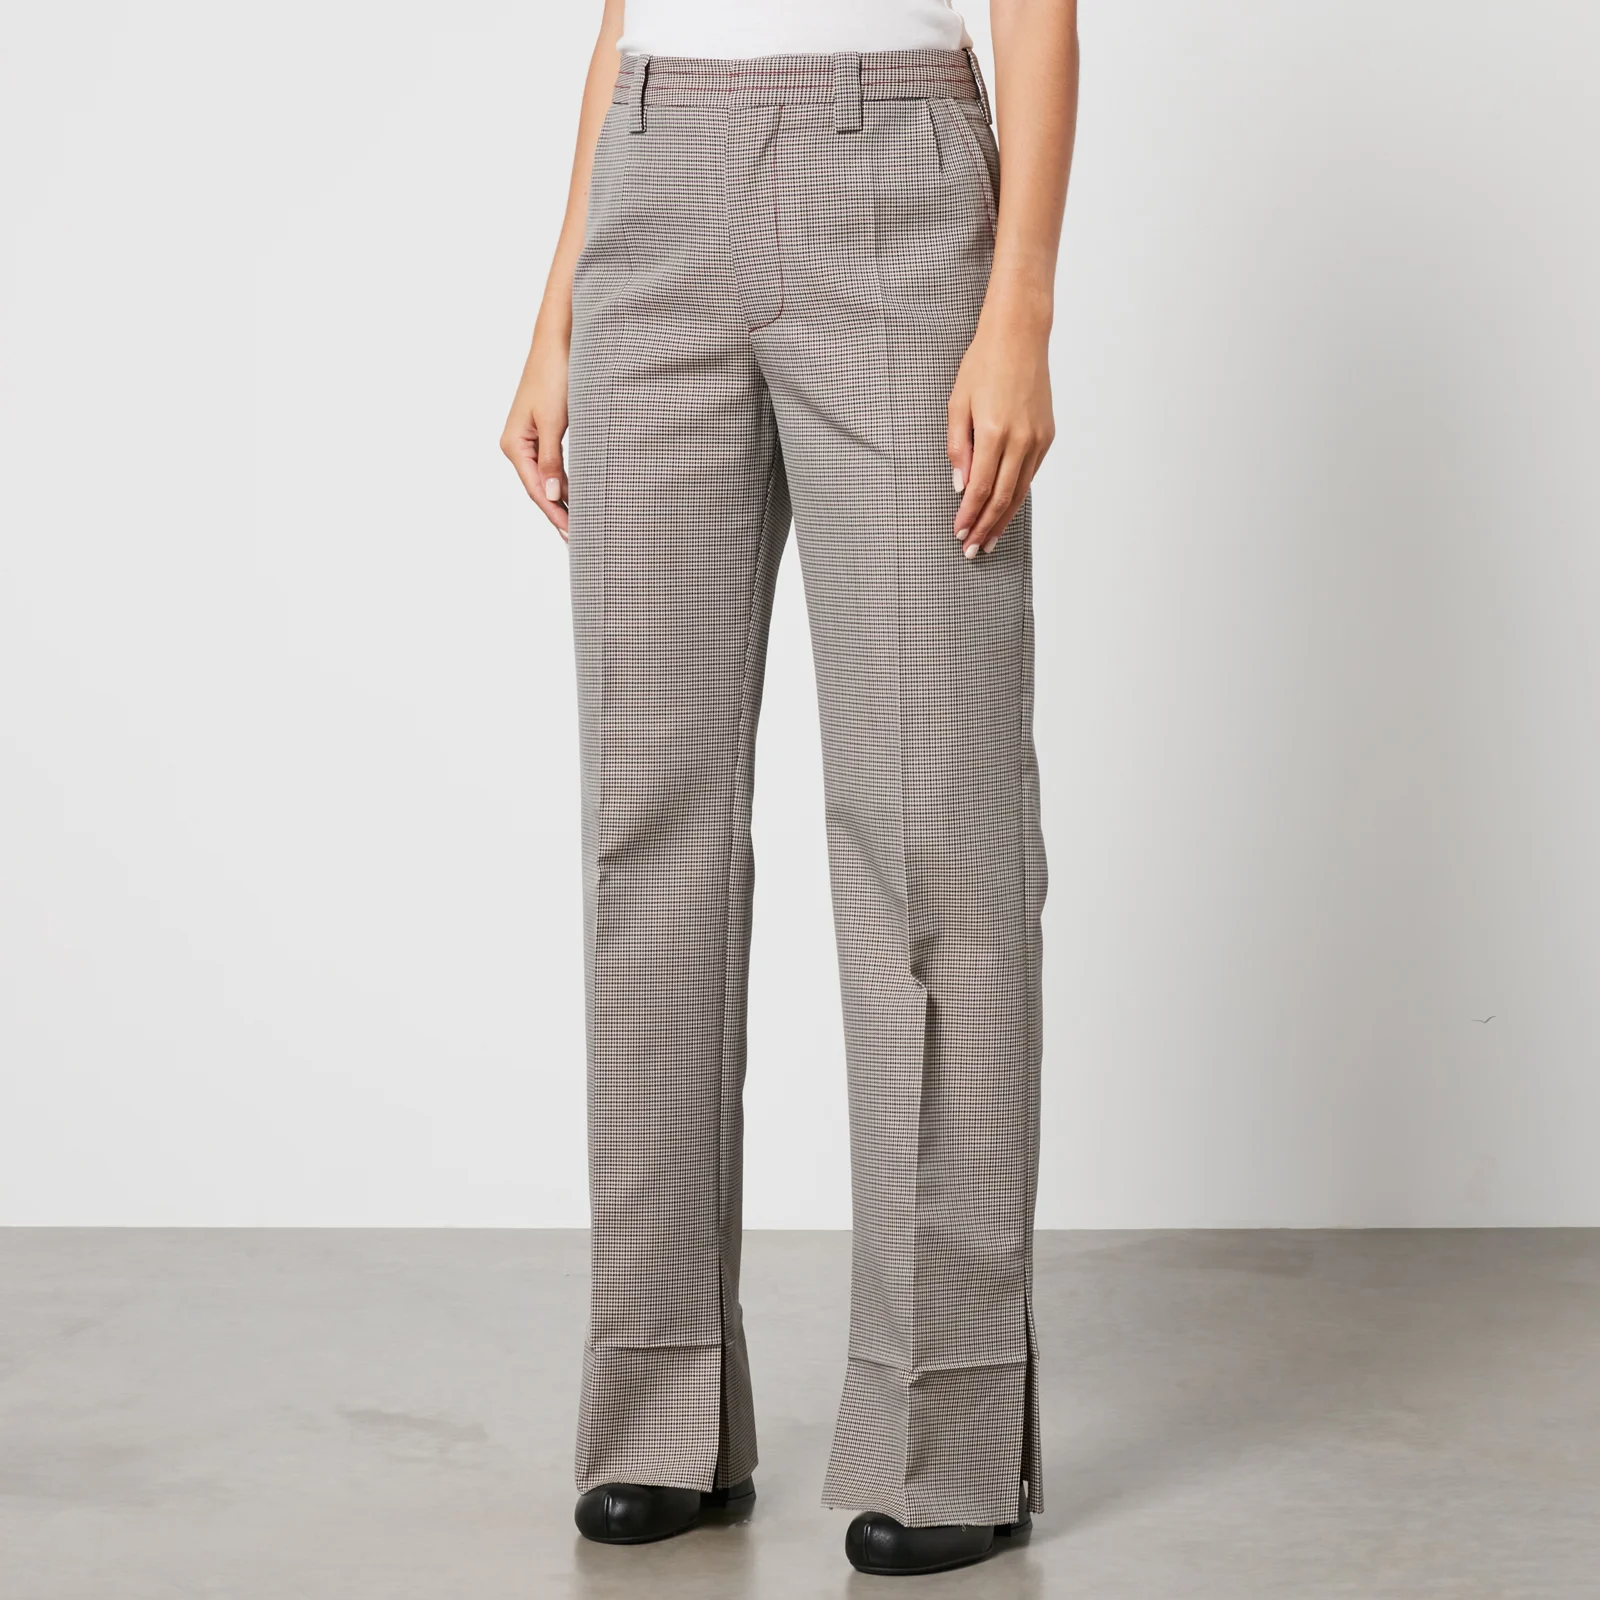 Marni Houndstooth Wool-Blend Trousers - IT 40/UK 8 Image 1